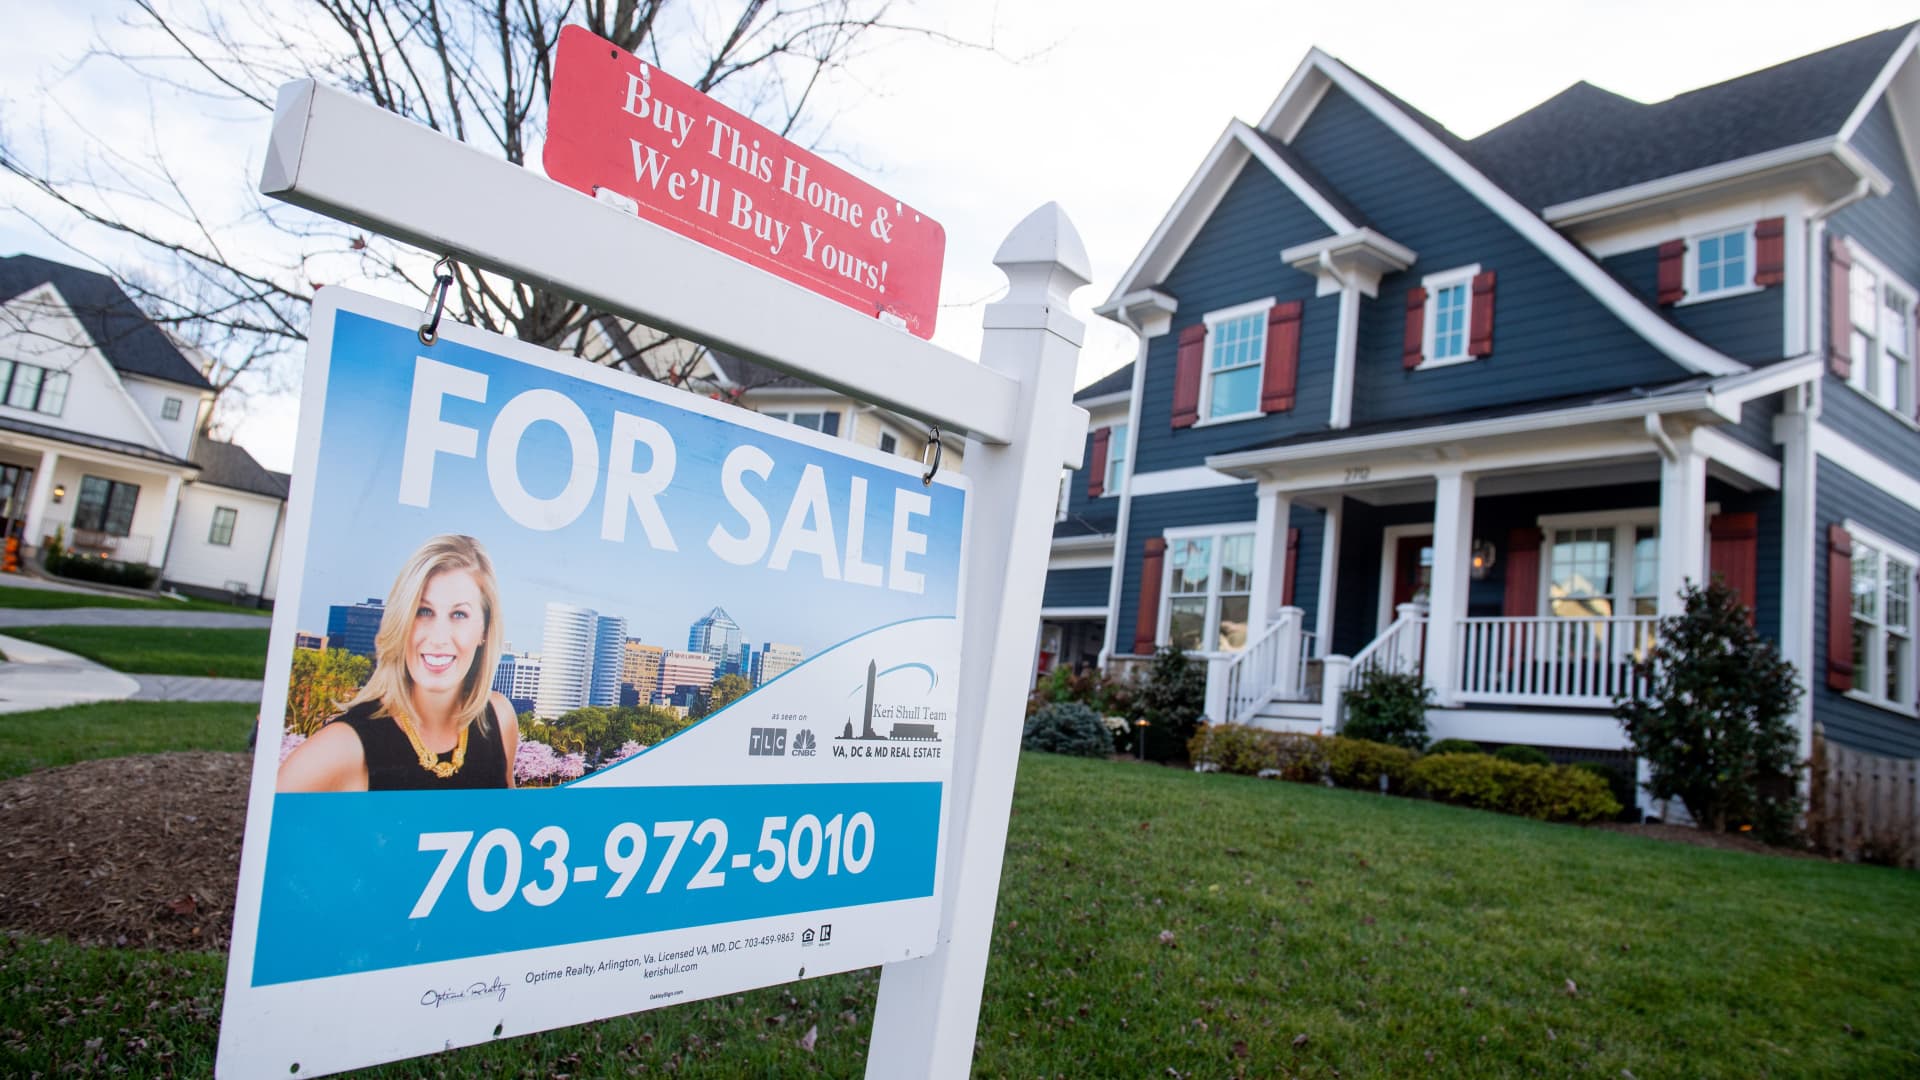 A house's real estate for sale sign is seen in front of a home in Arlington, Virginia, November 19, 2020.